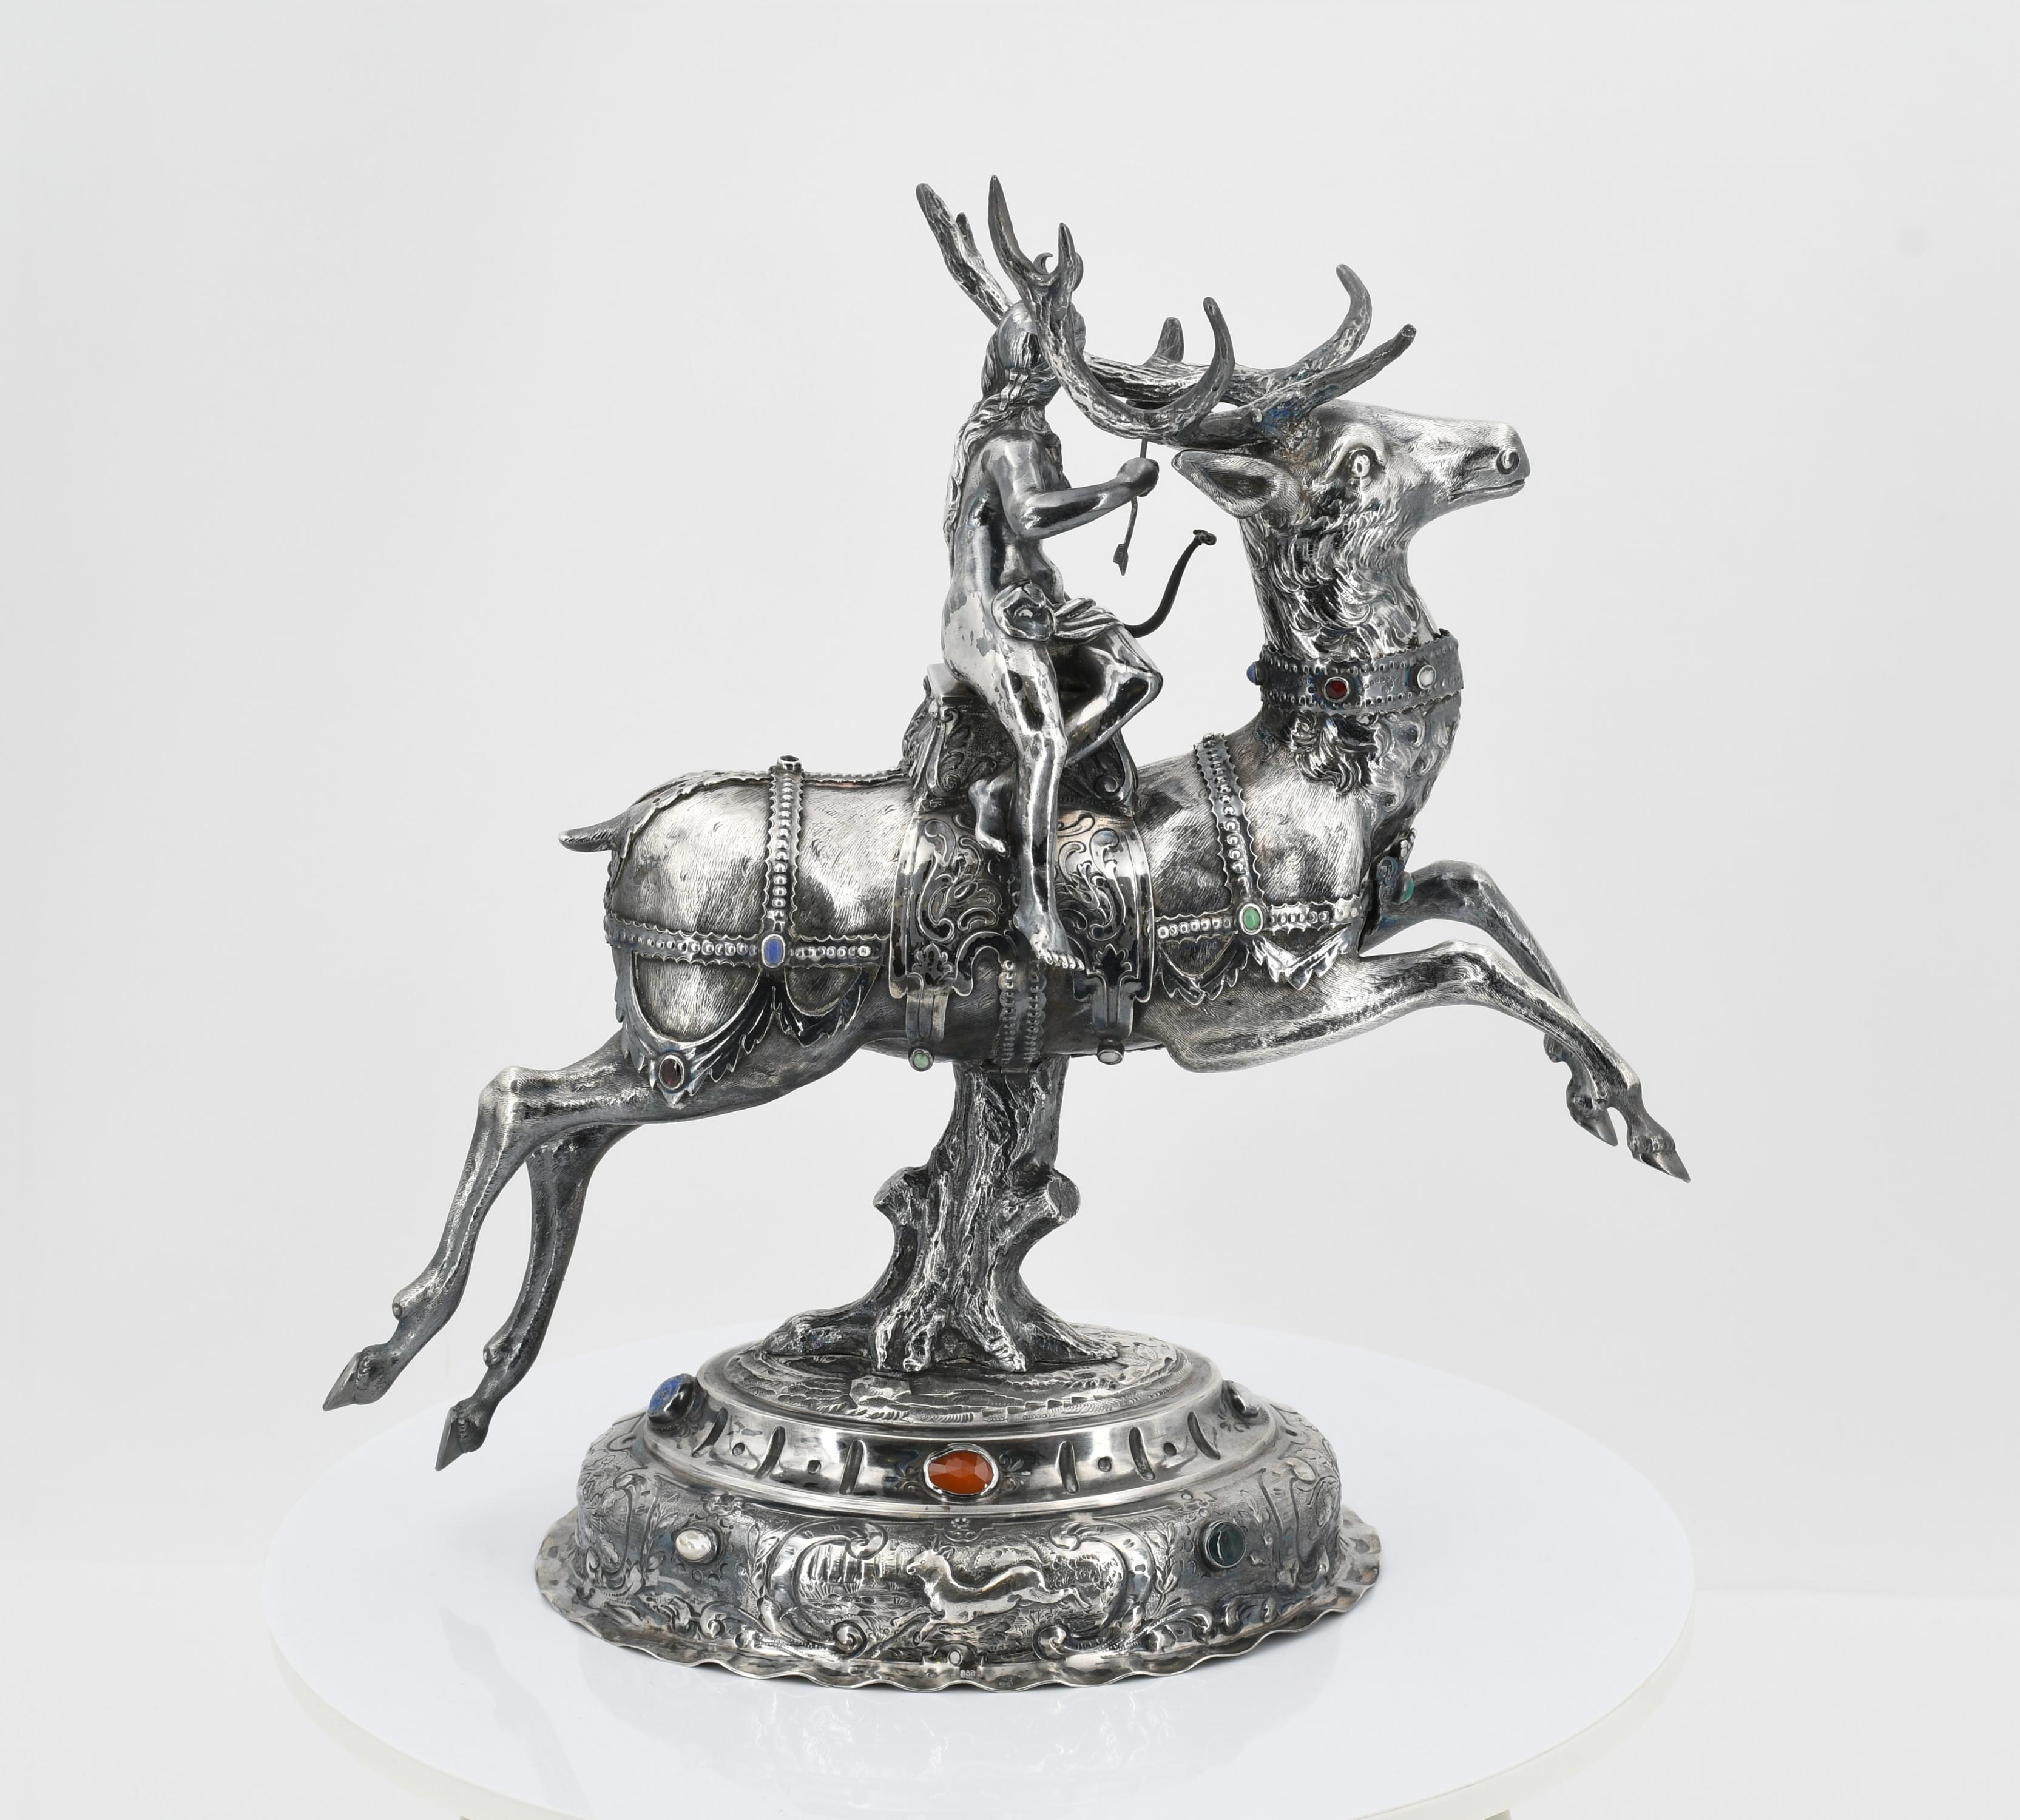 Magnificent Historicism Centerpiece with Diana on Stag - Image 4 of 6